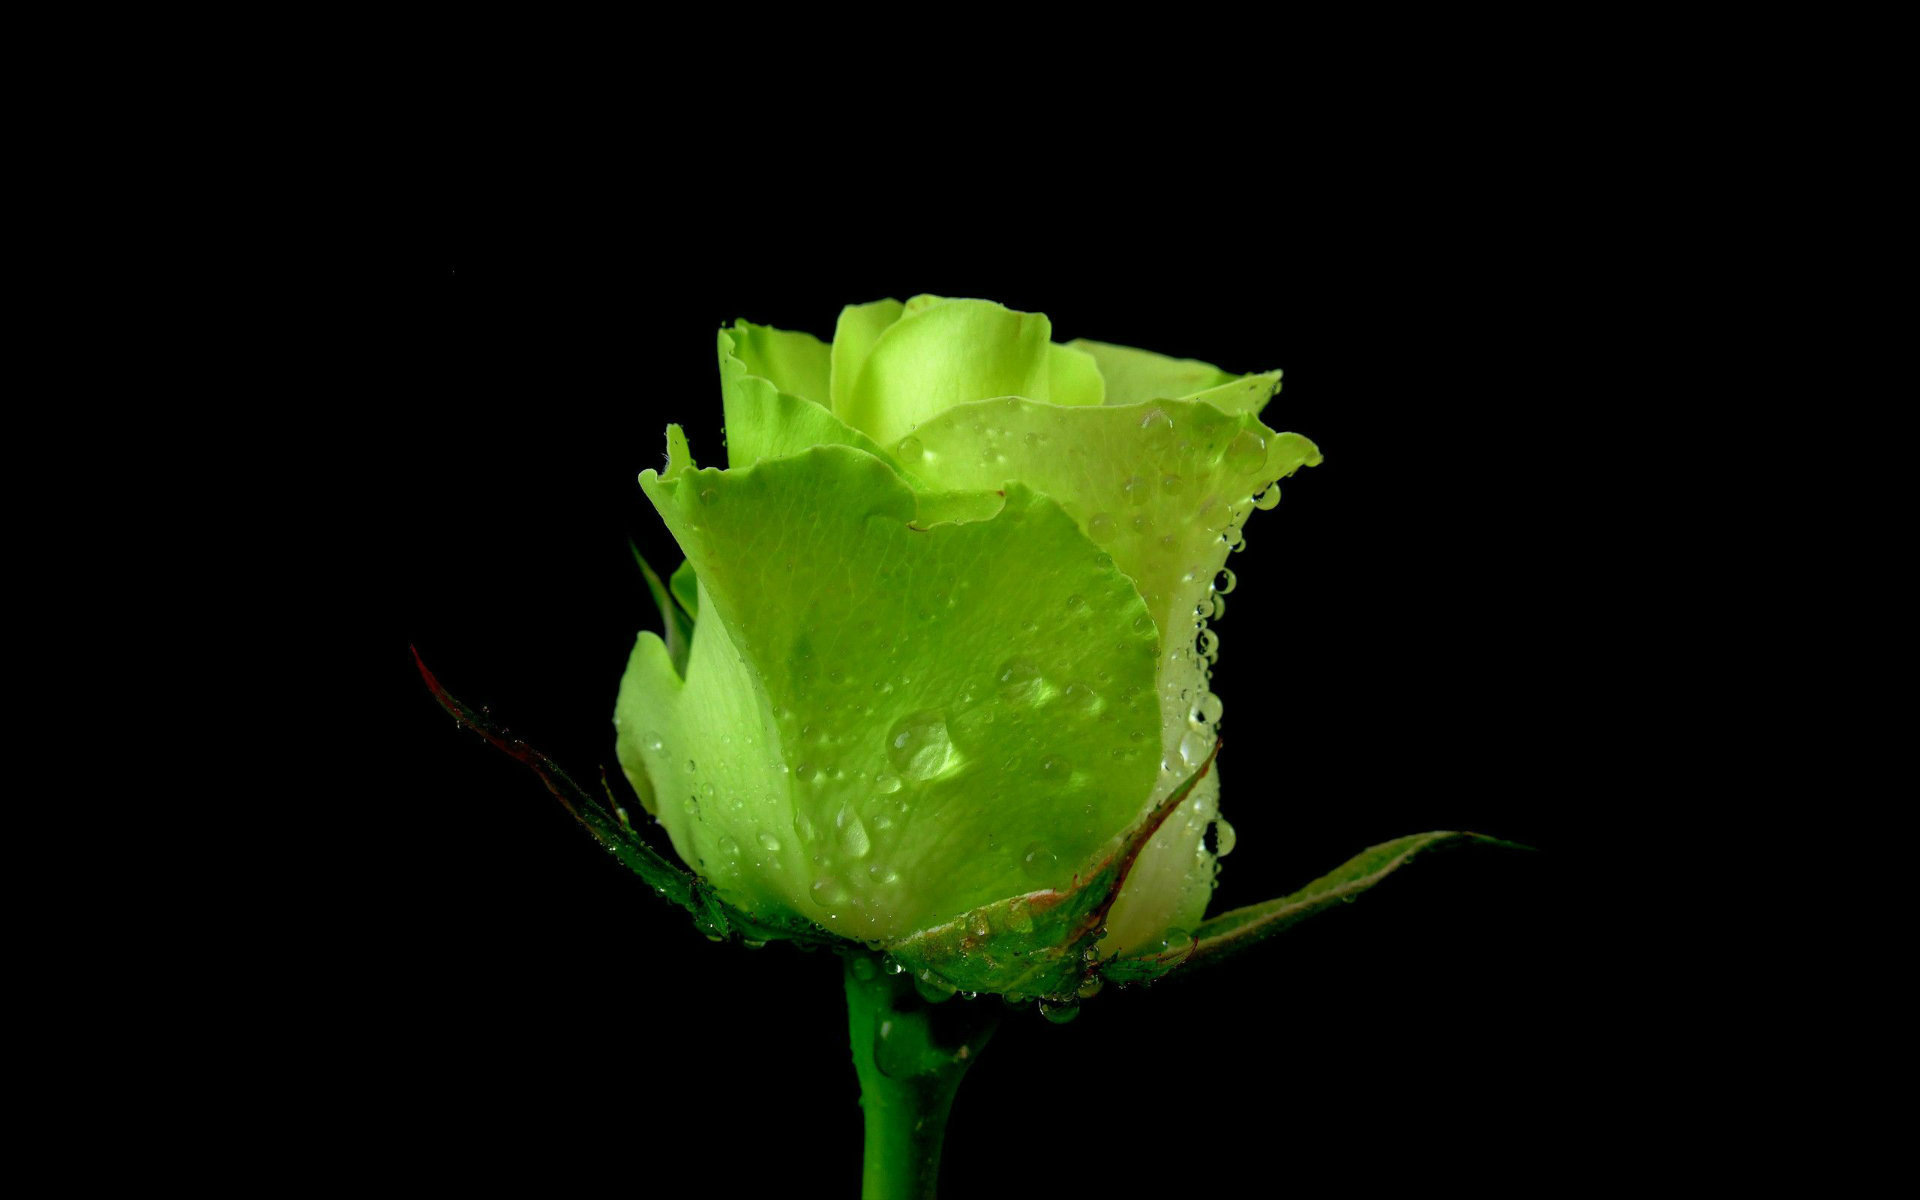 Green Rose HD Wallpaper Pictures Of Beautiful Flowers